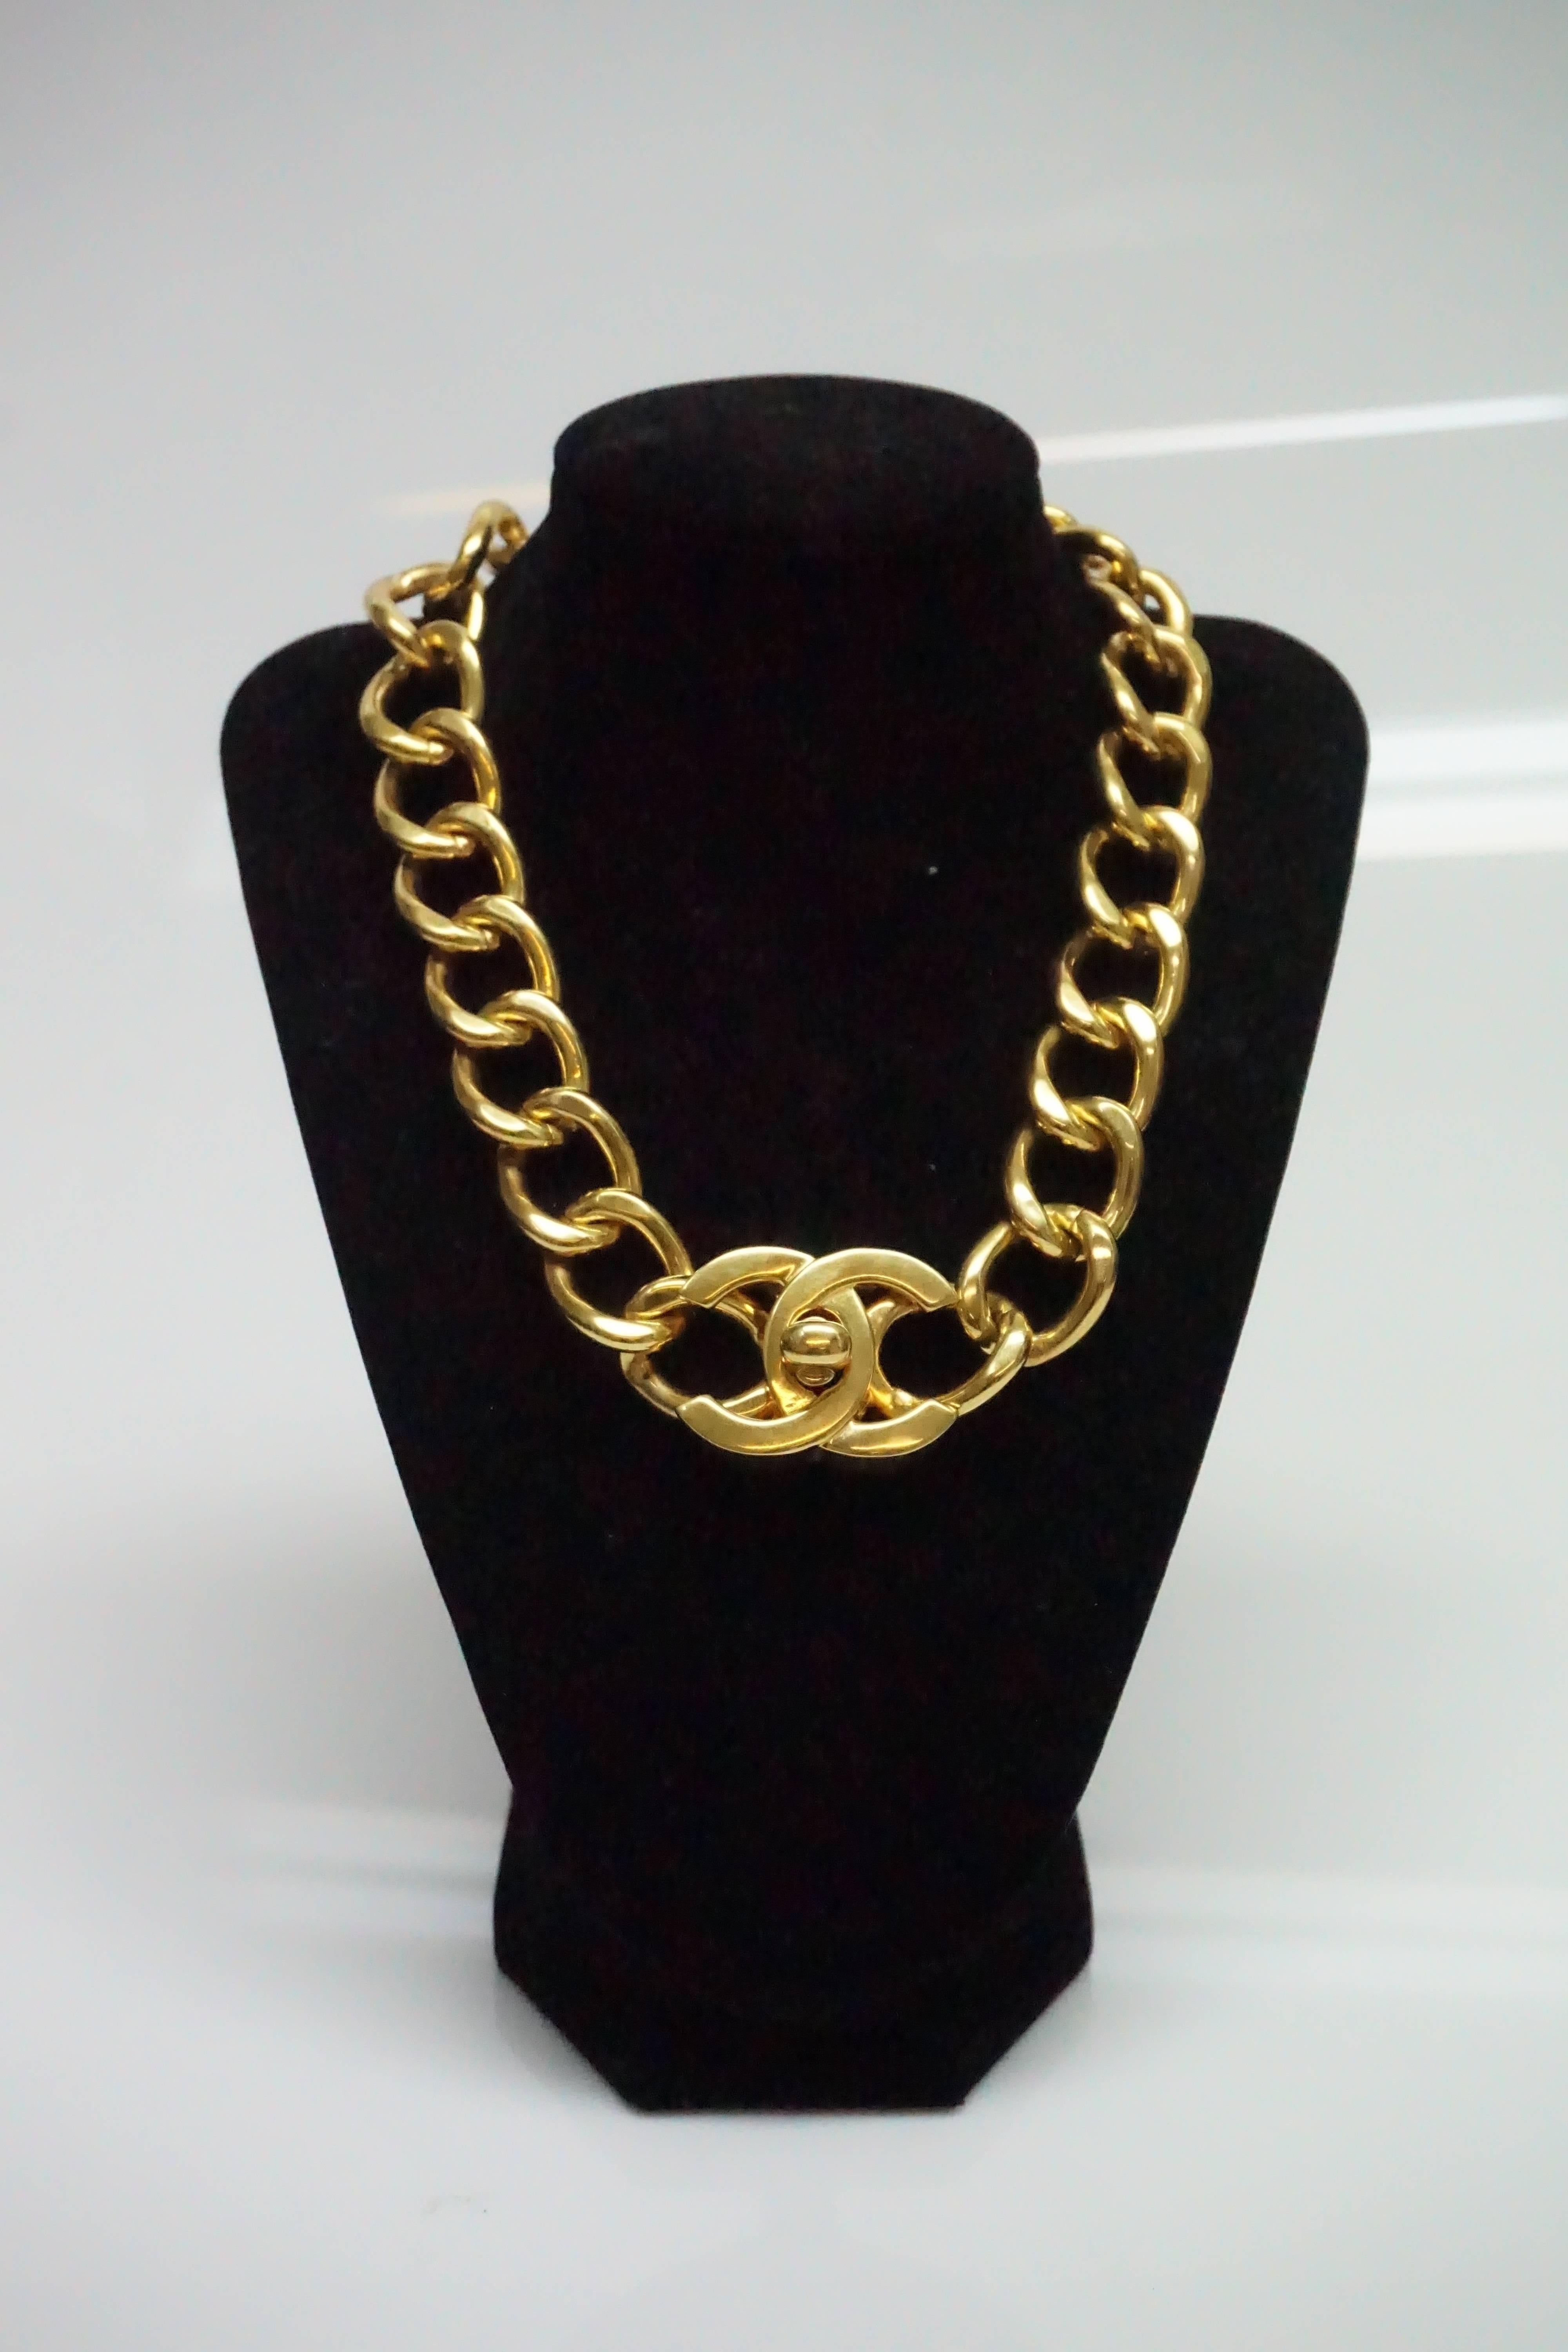 Chanel Gold Chain Link Necklace with Turnkey CC Closure- 95A.  This classic Chanel piece is in excellent condition. There are barely any scratches on it, just a few on the chains and around the CC logo. The necklace has an opening where the CC logo